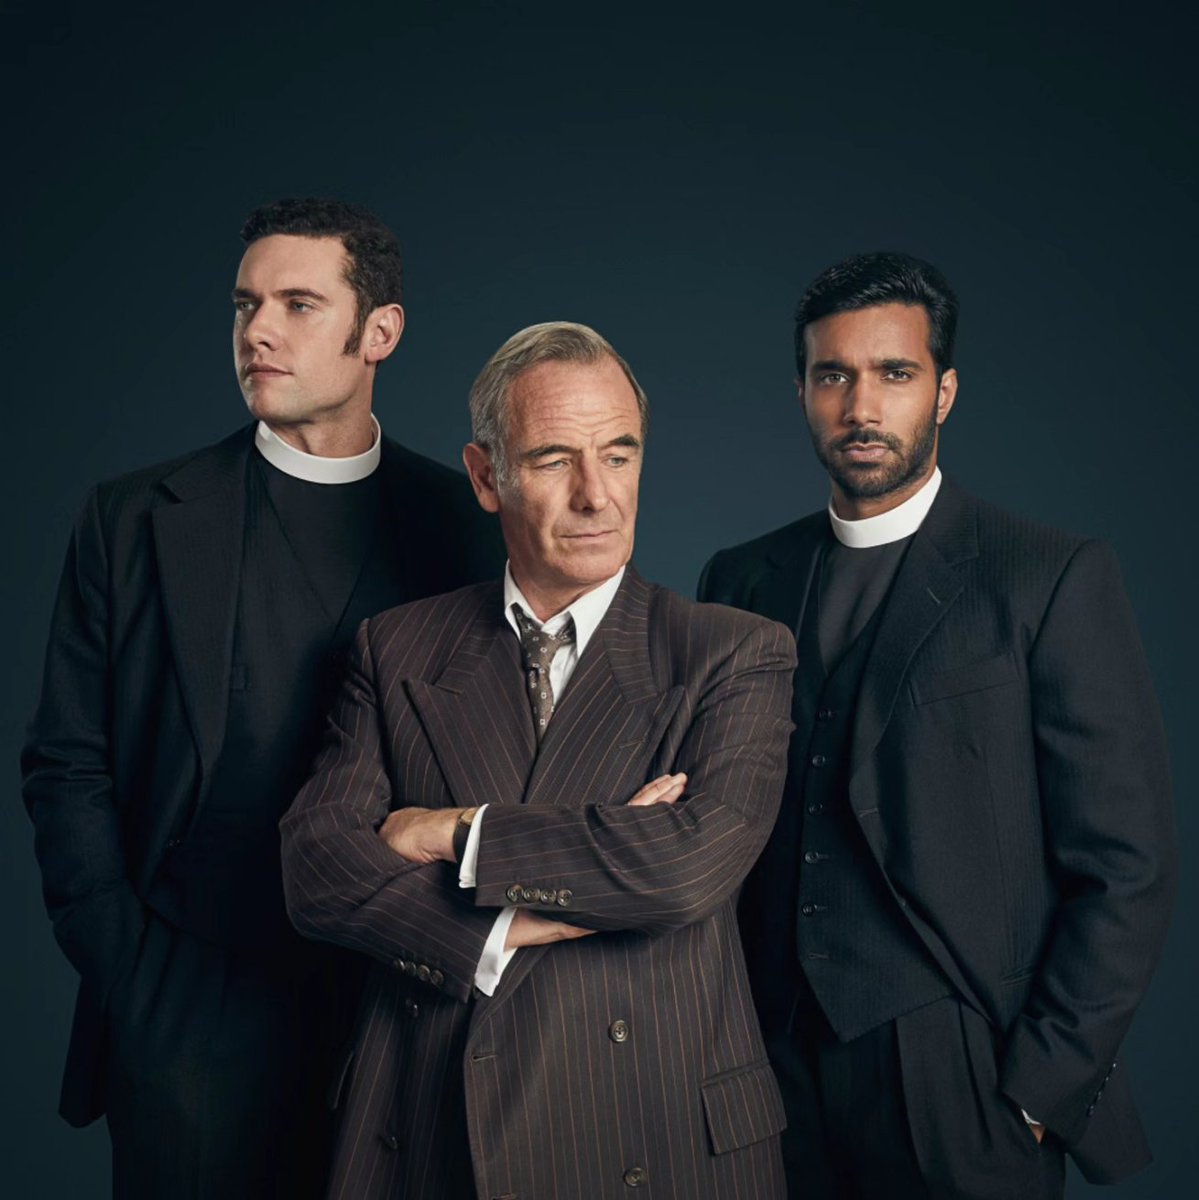 FIRST LOOK - Meet Reverend Alphy Kotteram. Grantchester, Season 9. Premiering in the USA on Sunday June 16th, 9pm (8pm central time) on @masterpiecepbs @PBS 🇺🇸